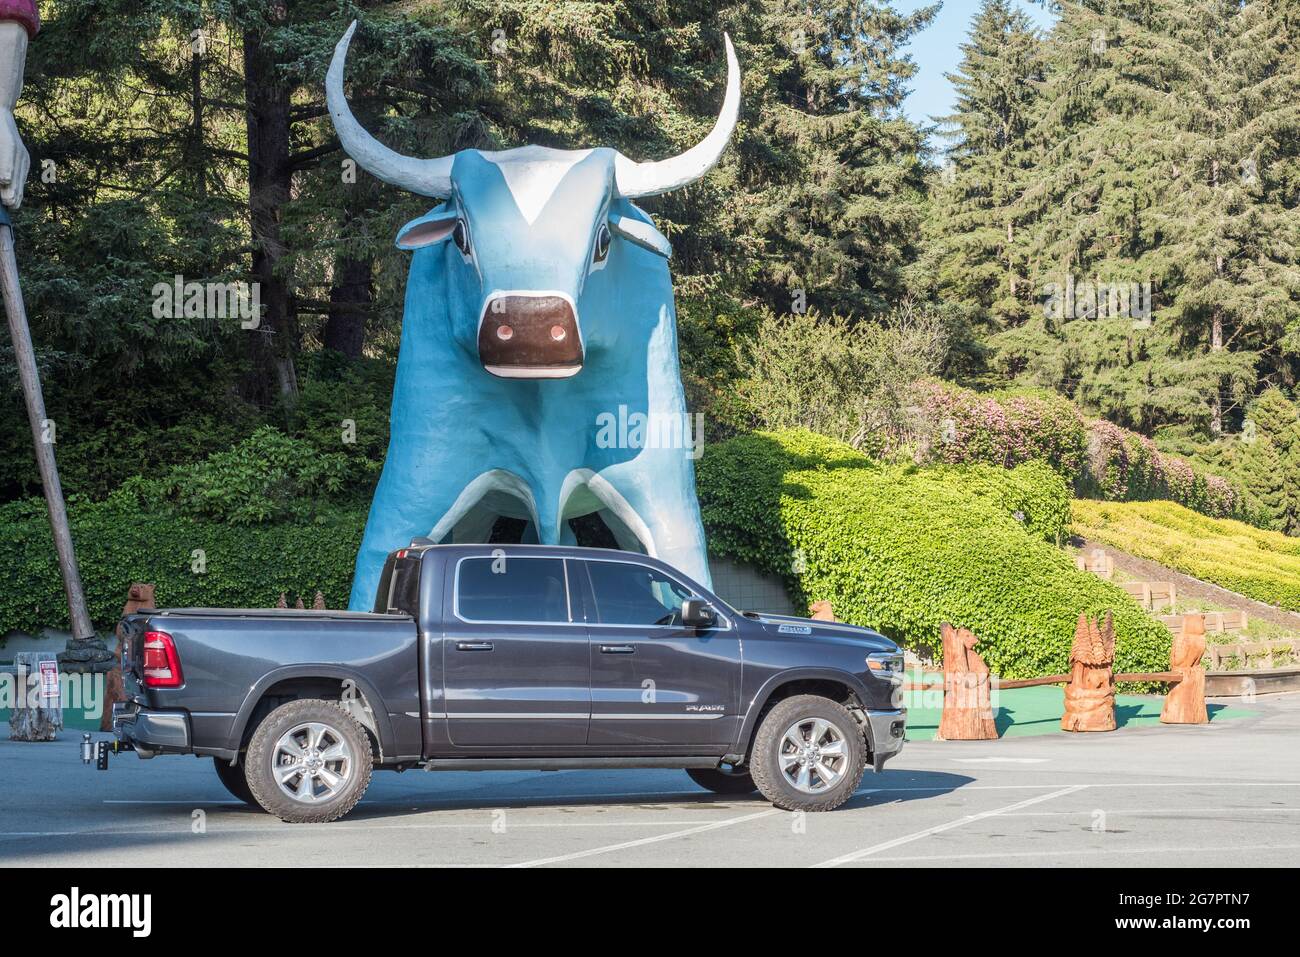 A statue of Babe the blue ox, a giant ox from American folklore, at a roadside tourist attraction in Northern California. Stock Photo